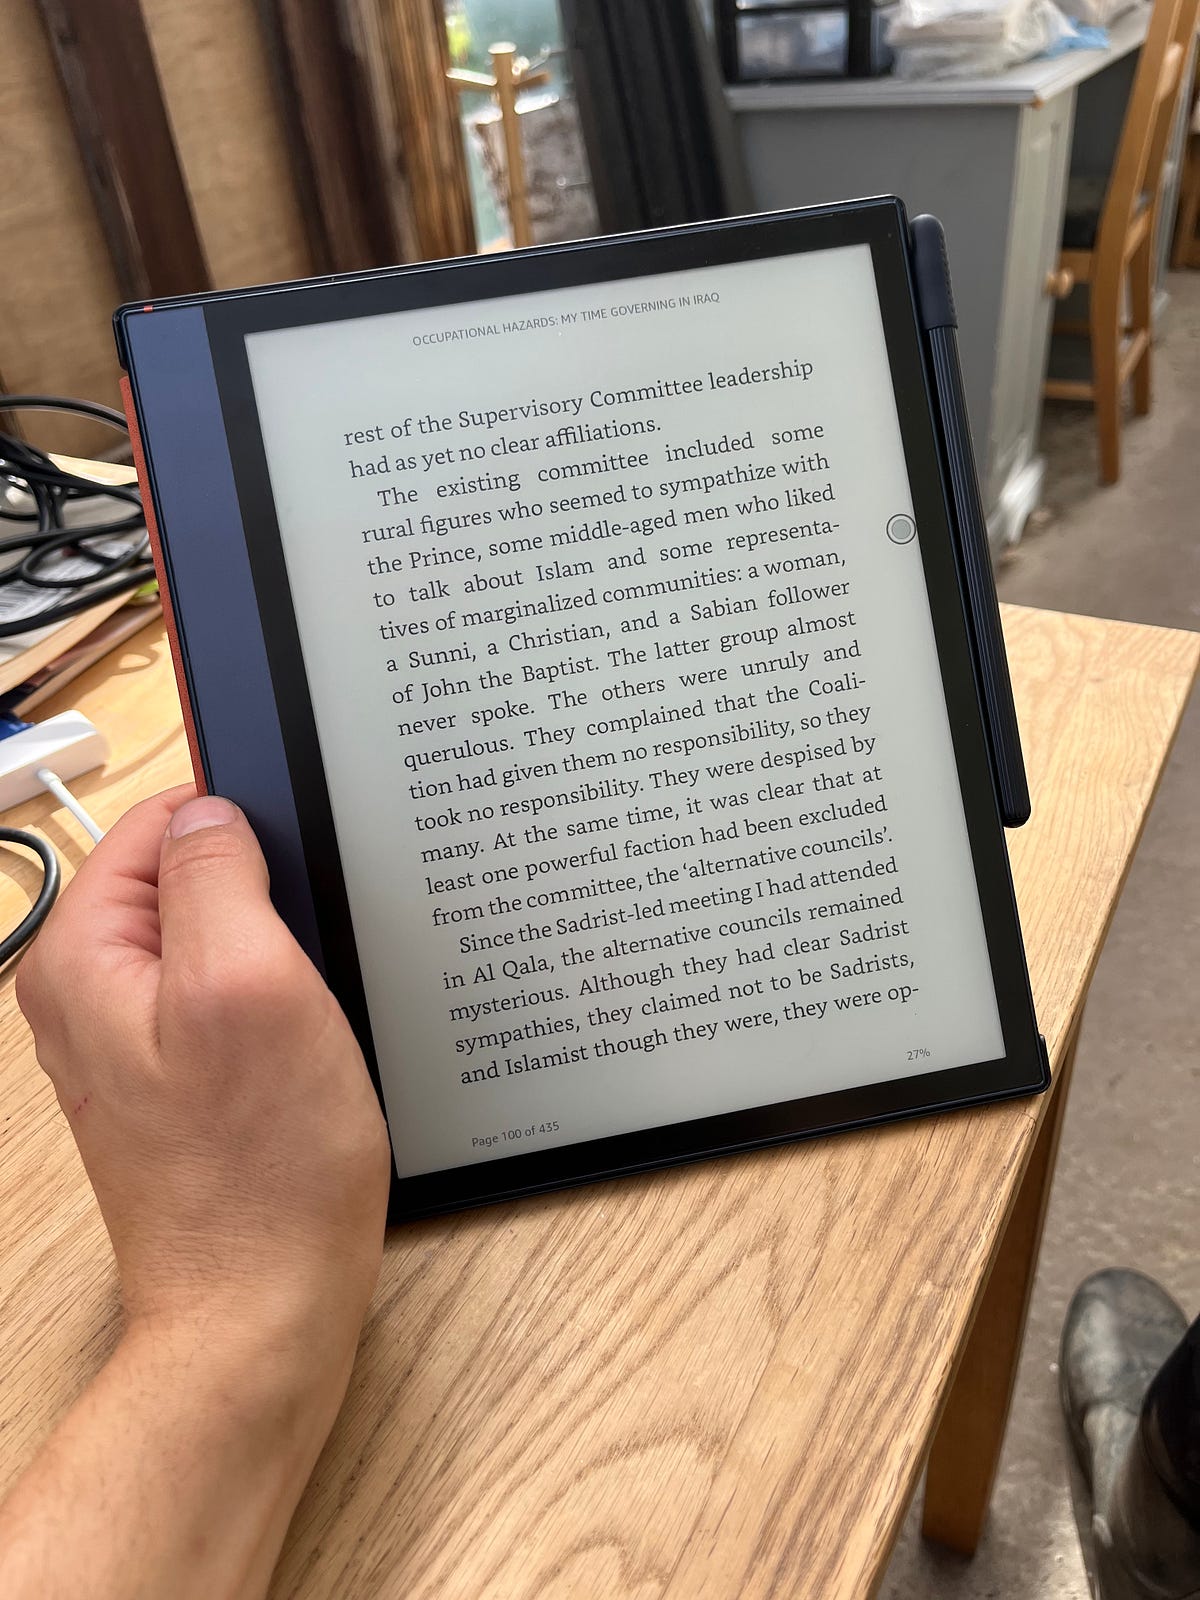 Hands-on Review of the Onyx Boox Note Air 3C E-notebook - Good e-Reader